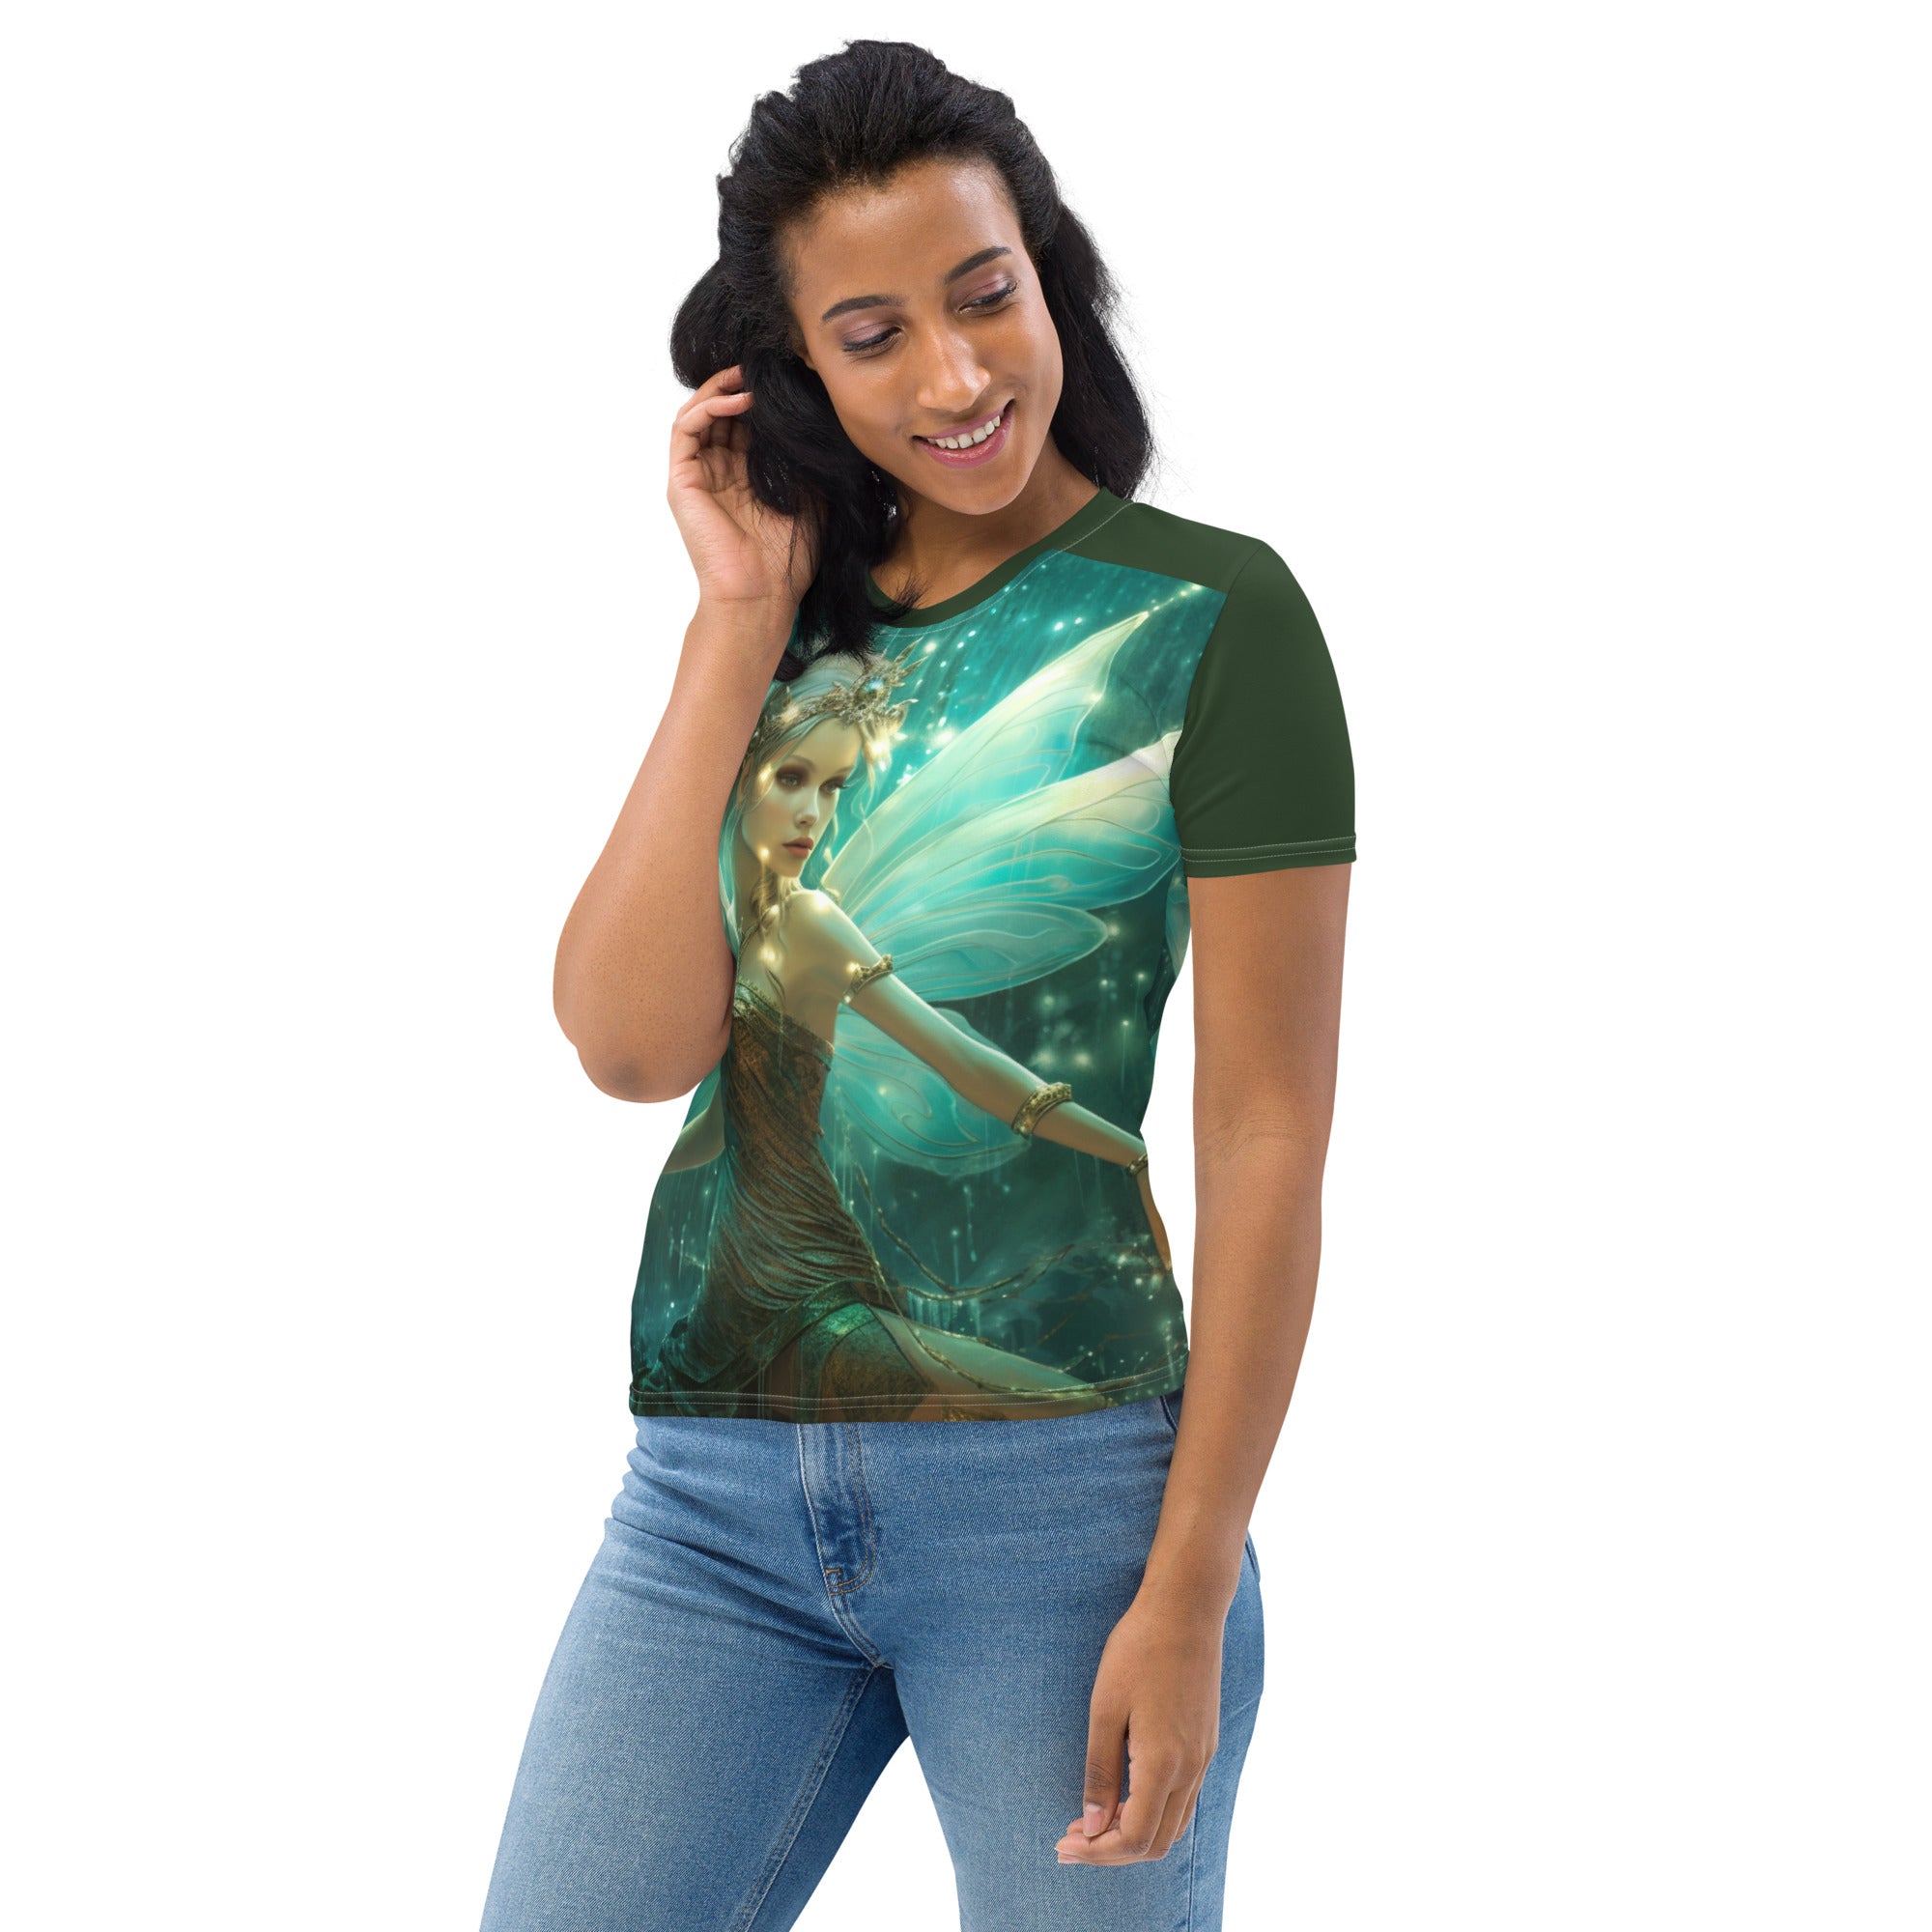 Elevate Your Style with Pure Beauty: Stunning Fairy T-Shirt!